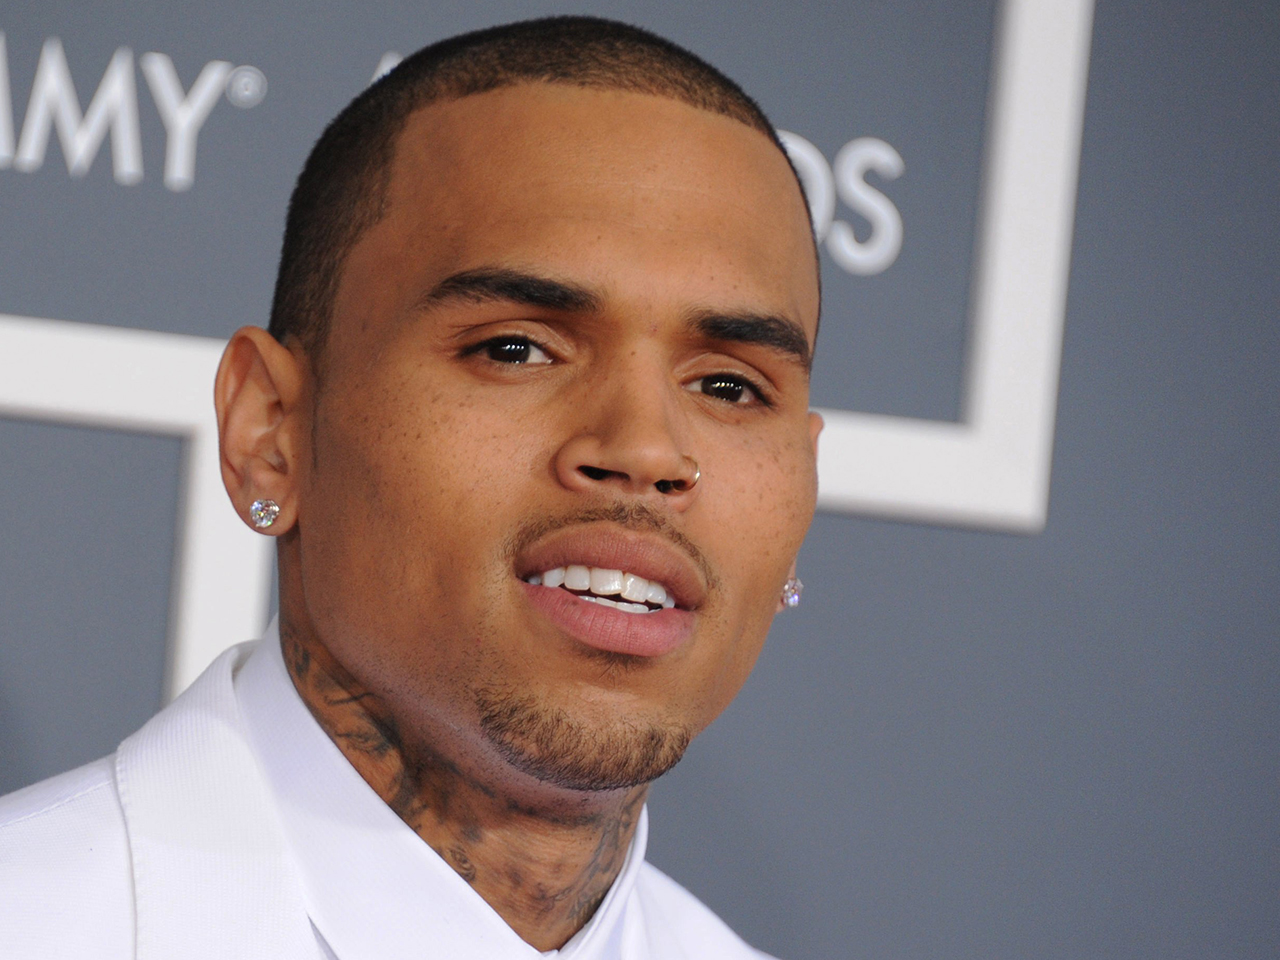 Chris Brown and bodyguard arrested for assault in D.C.